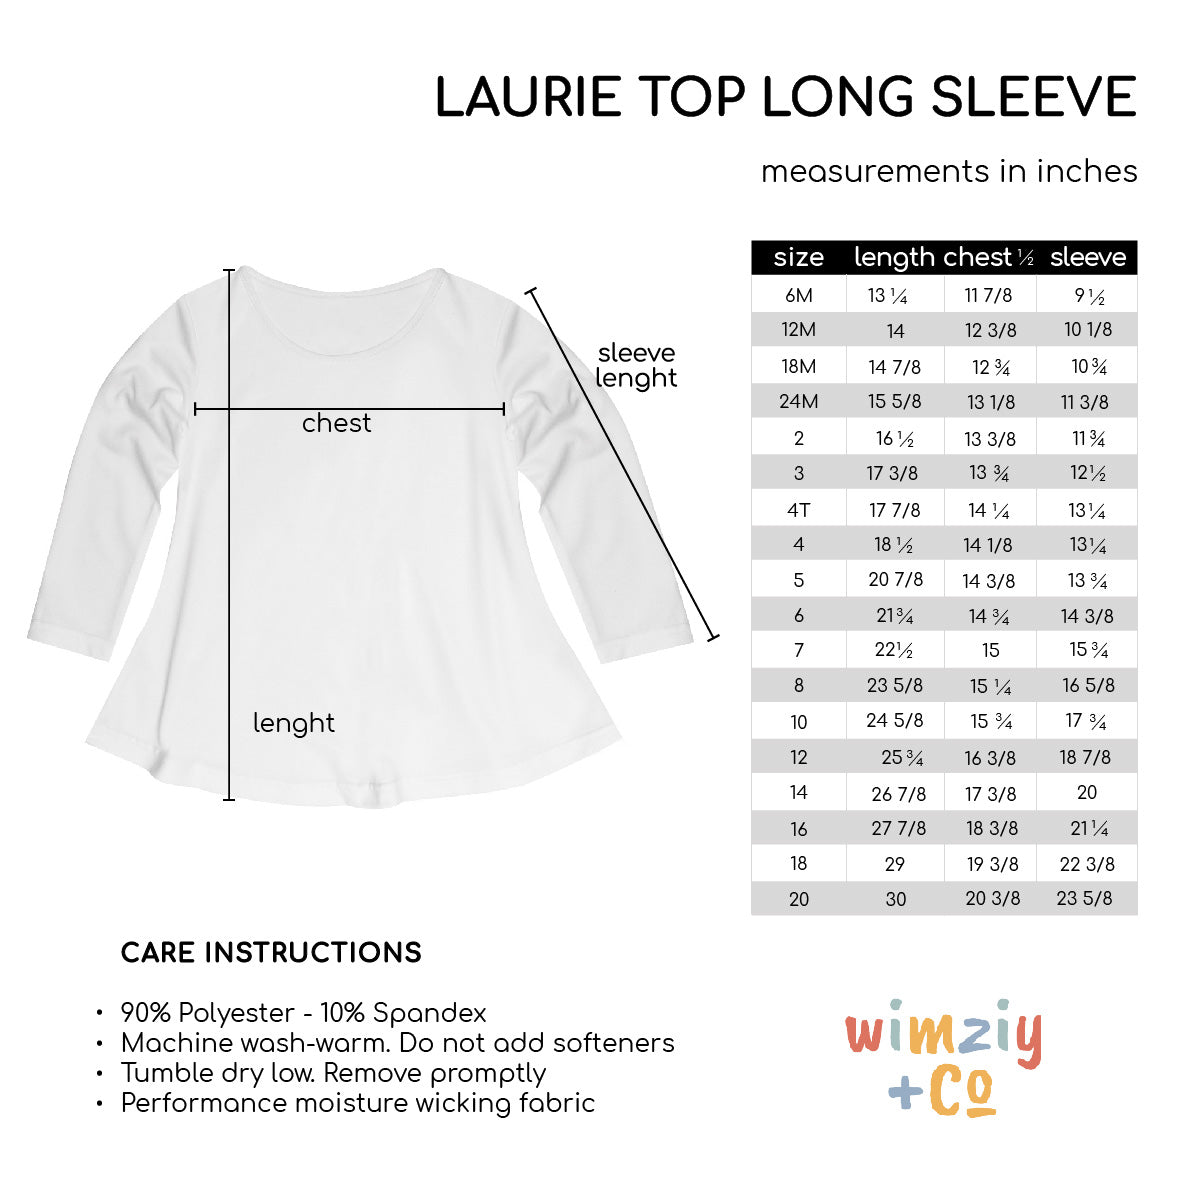 Easter Eggs Name White Long Sleeve Laurie Top - Wimziy&Co.